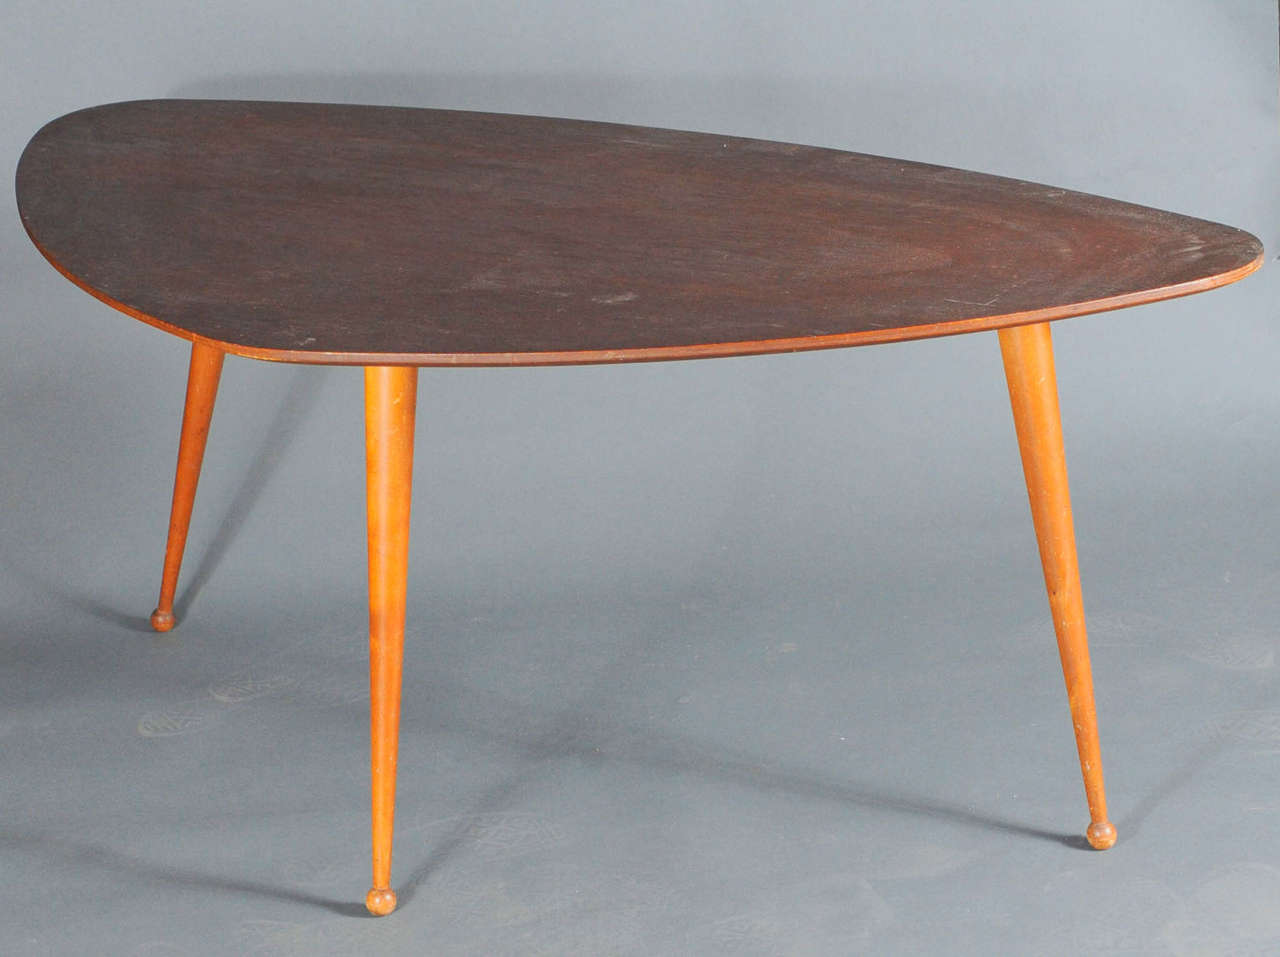 Rare kidney shaped coffee table by Dutch designer Cees Braakman for manufacturer Pastoe. Stamped 